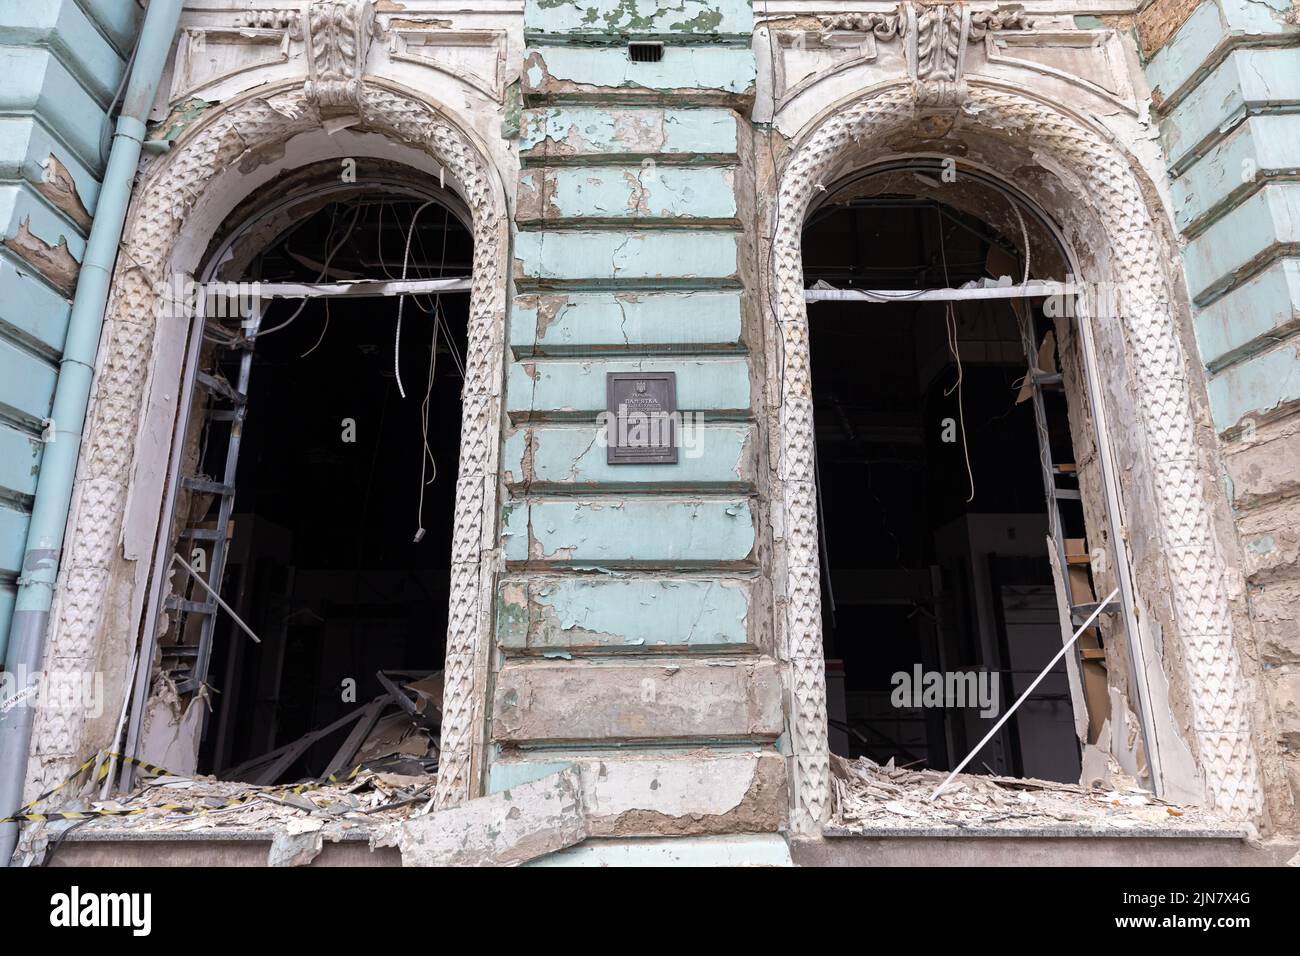 Damaged architectural monument of the city of Kharkiv. A commemorative plaque about the architectural value of the building is seen on the wall as well as broken windows due to Russian shelling in Kharkiv. Stock Photo